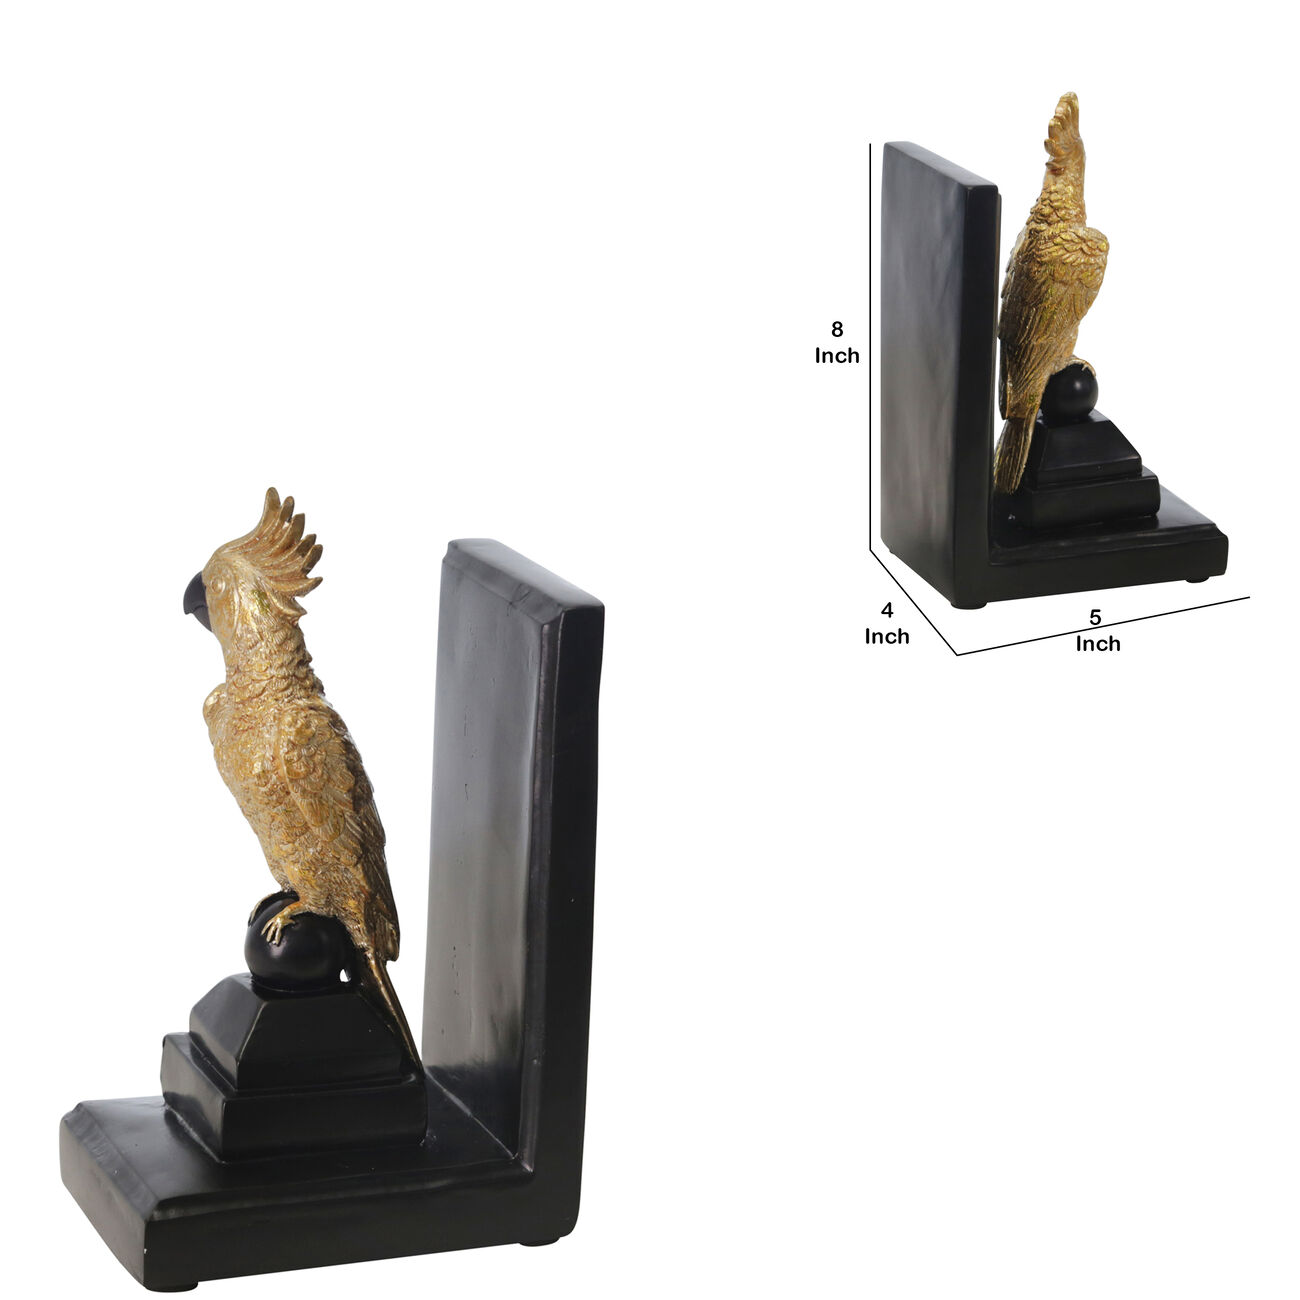 Polyresin L Shaped Cocktail Bookend with Rubber Caps, Black and Gold